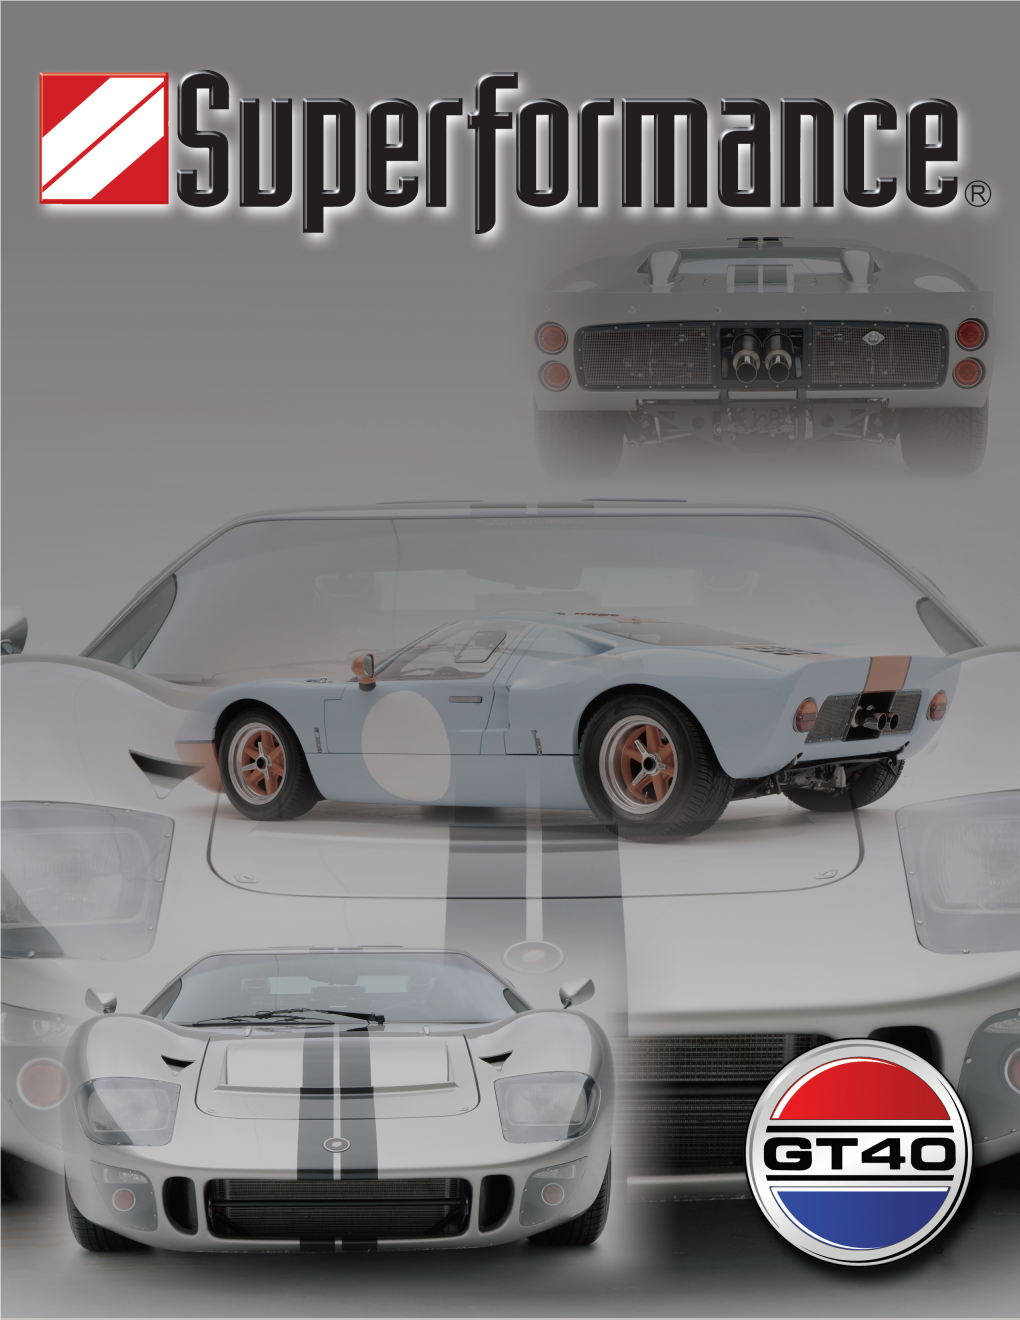 GT40 Owners Manual